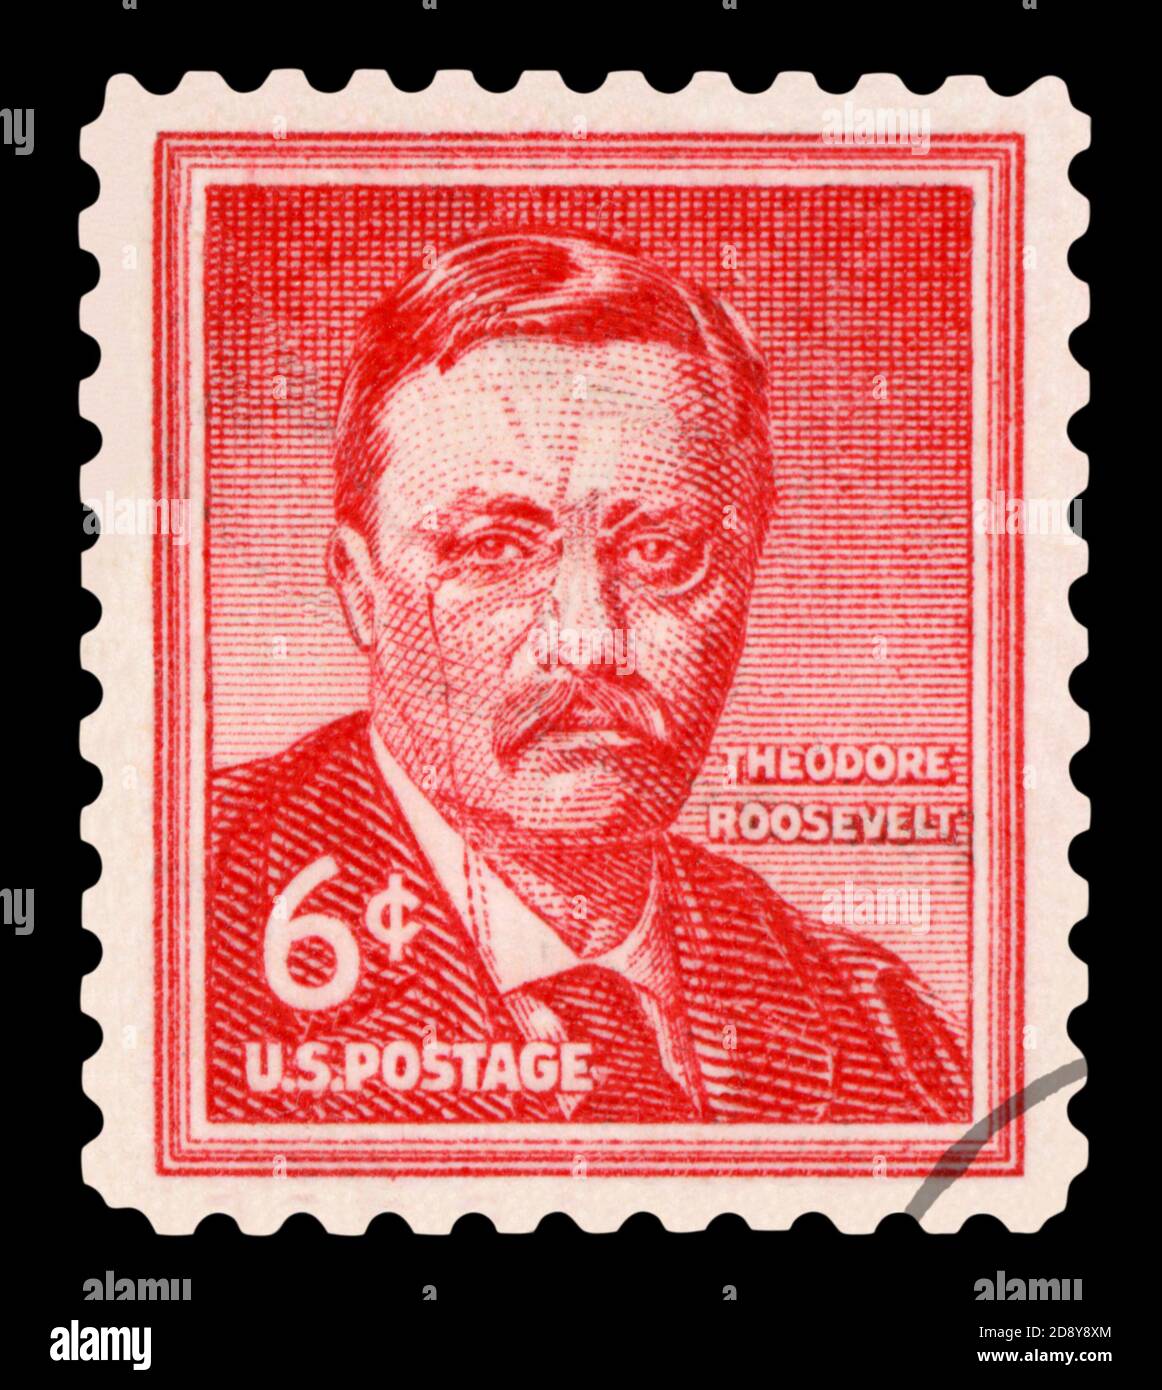 USA - CIRCA 1955: A stamp printed in United States of America shows Theodore 'Teddy' Roosevelt (1858-1919) was the 26th President of the United States Stock Photo